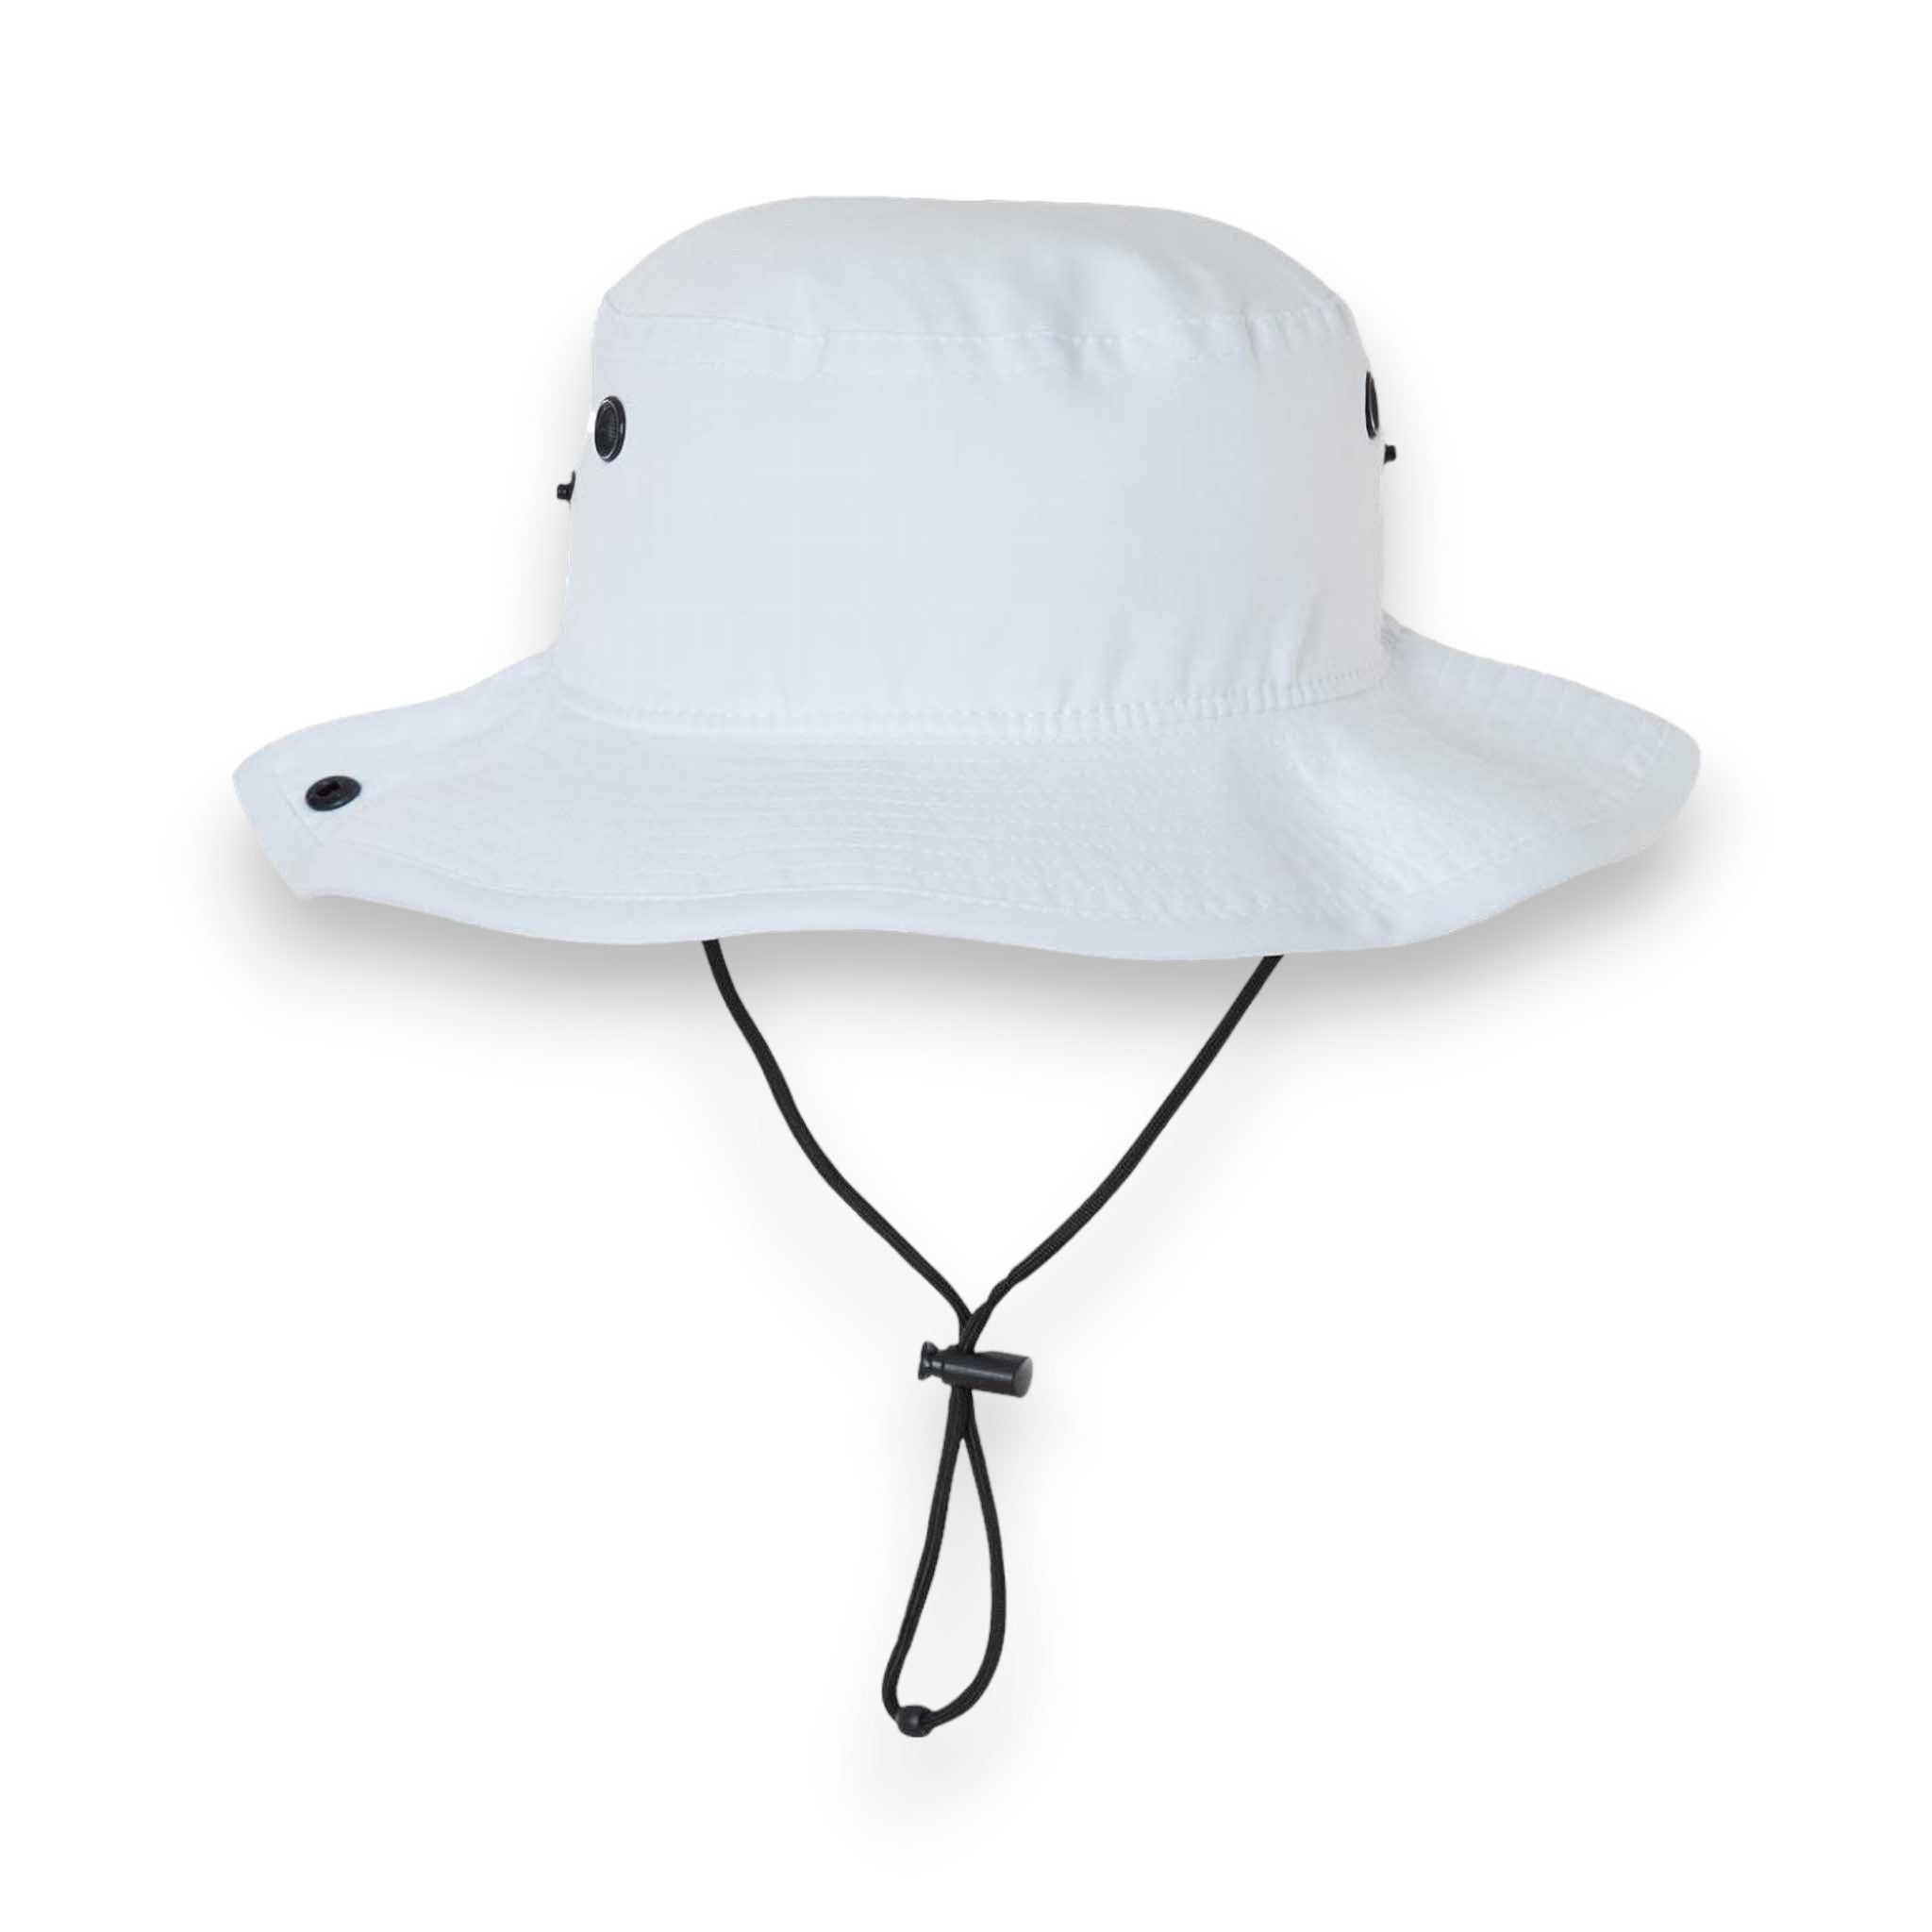 Front view of LEGACY CFB custom hat in white